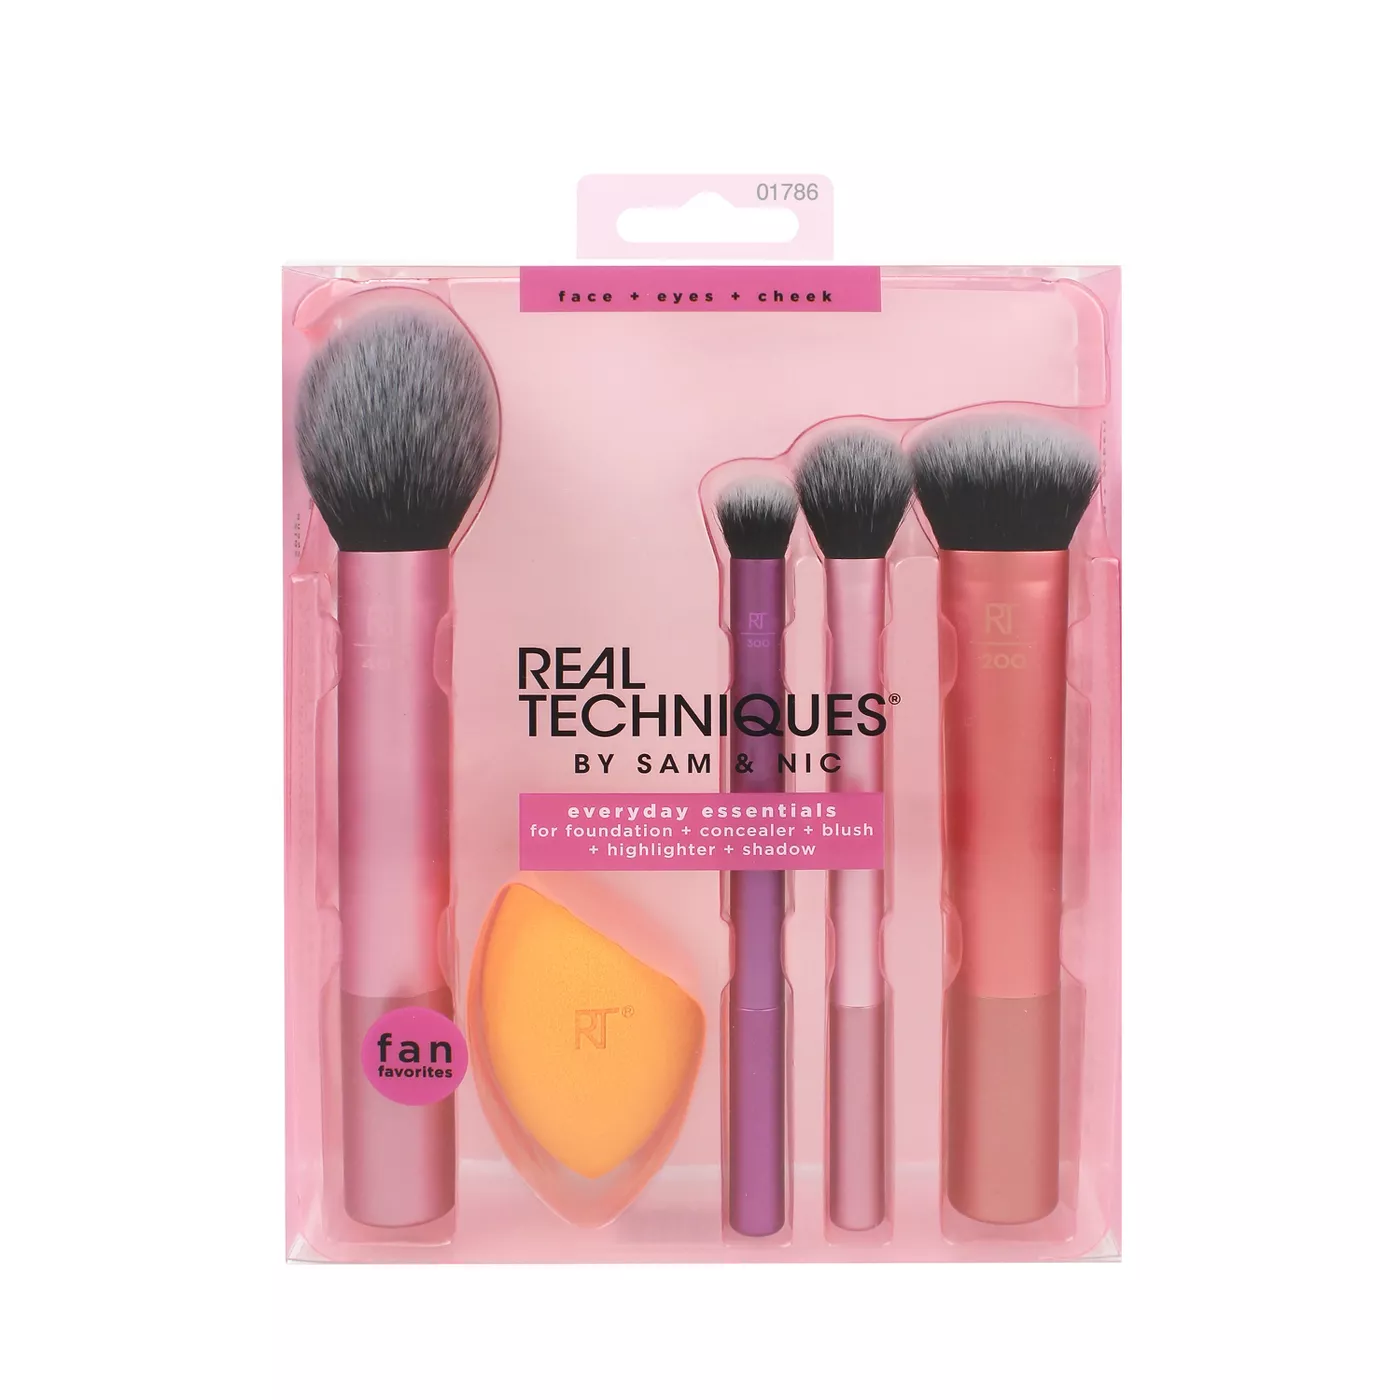 Real Techniques Make Up Must Have Brush Kit - image 1 of 7